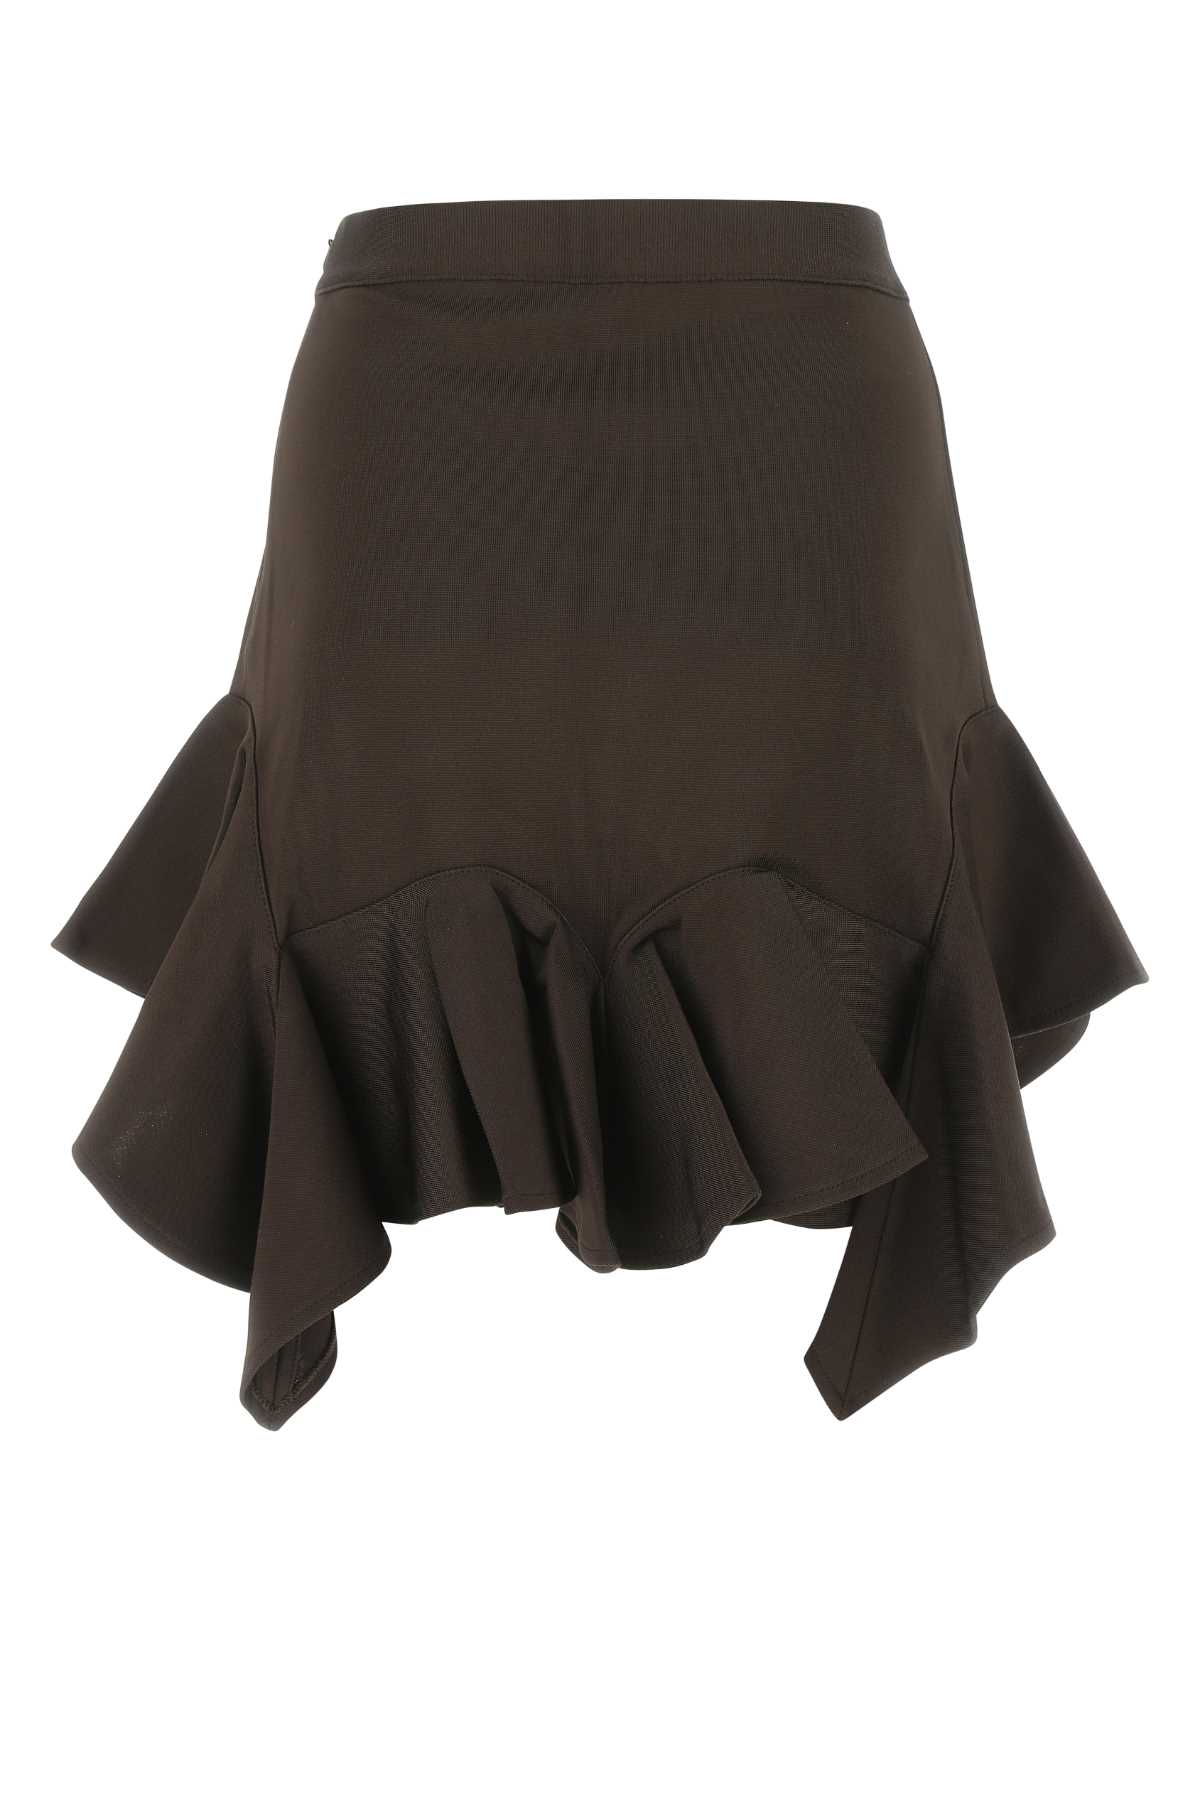 Givenchy Brown Viscose Skirt In 200